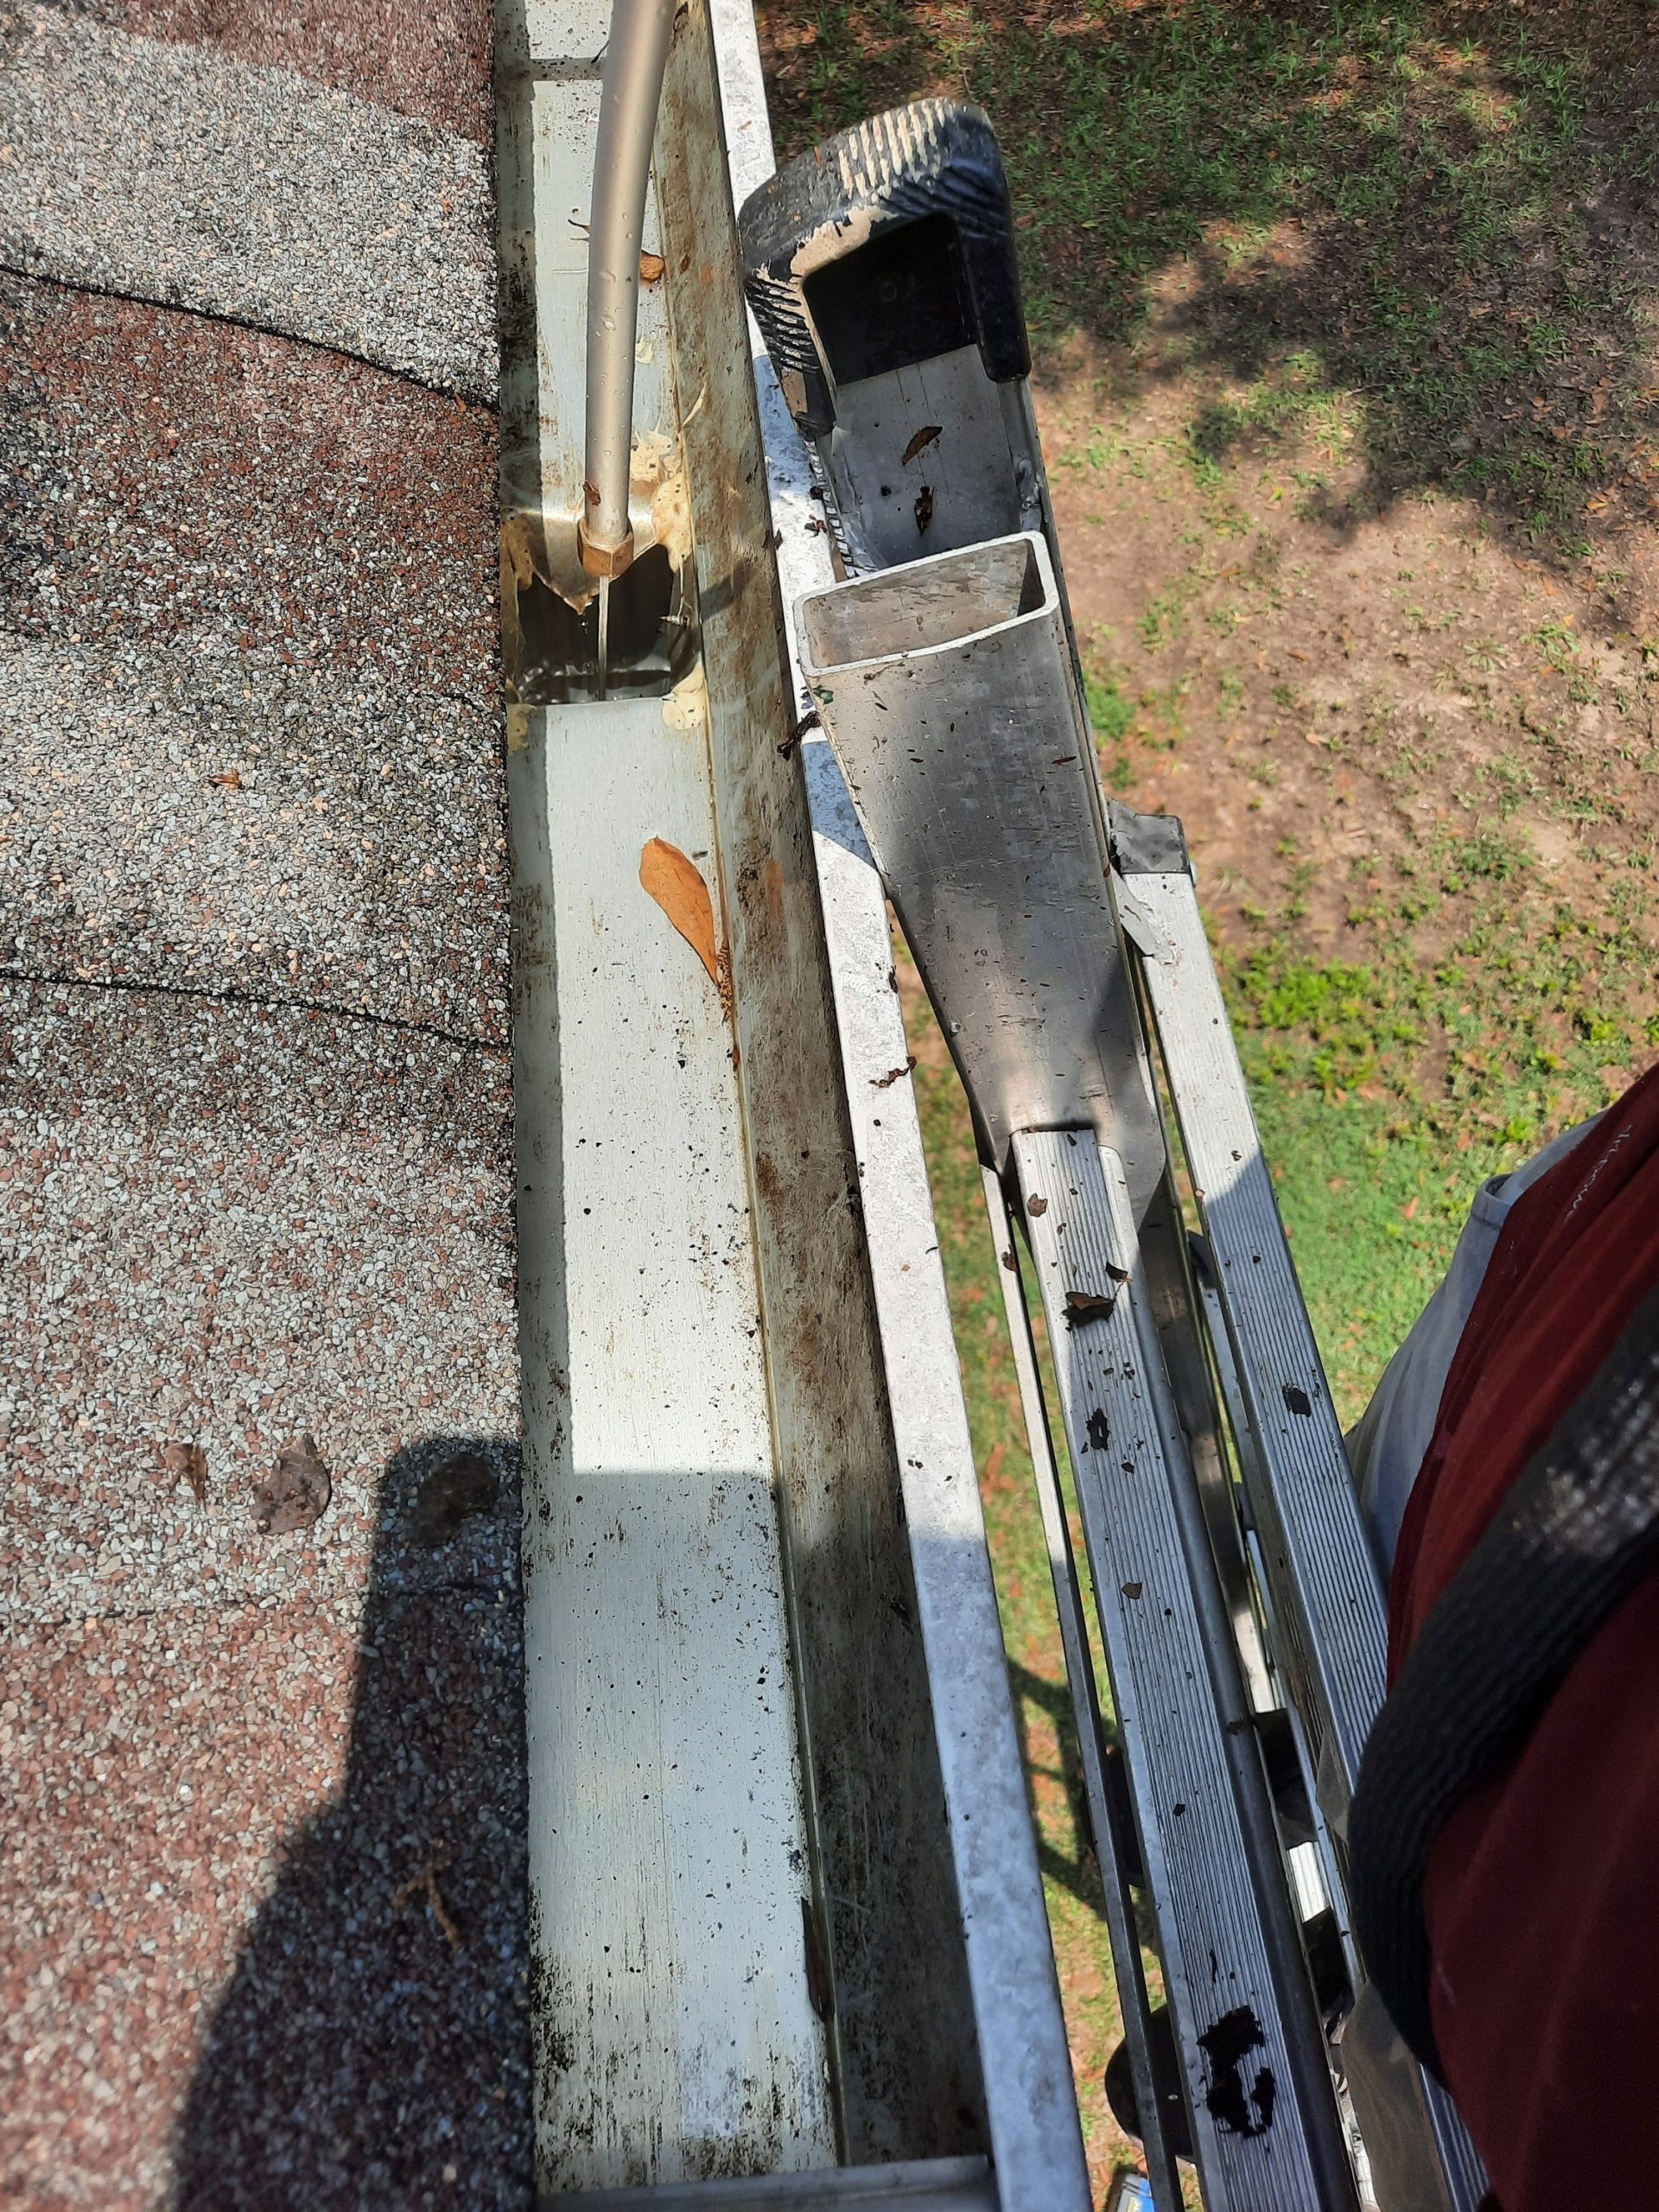 Gutter Cleaning Service in Olathe, KS for Victor's Home